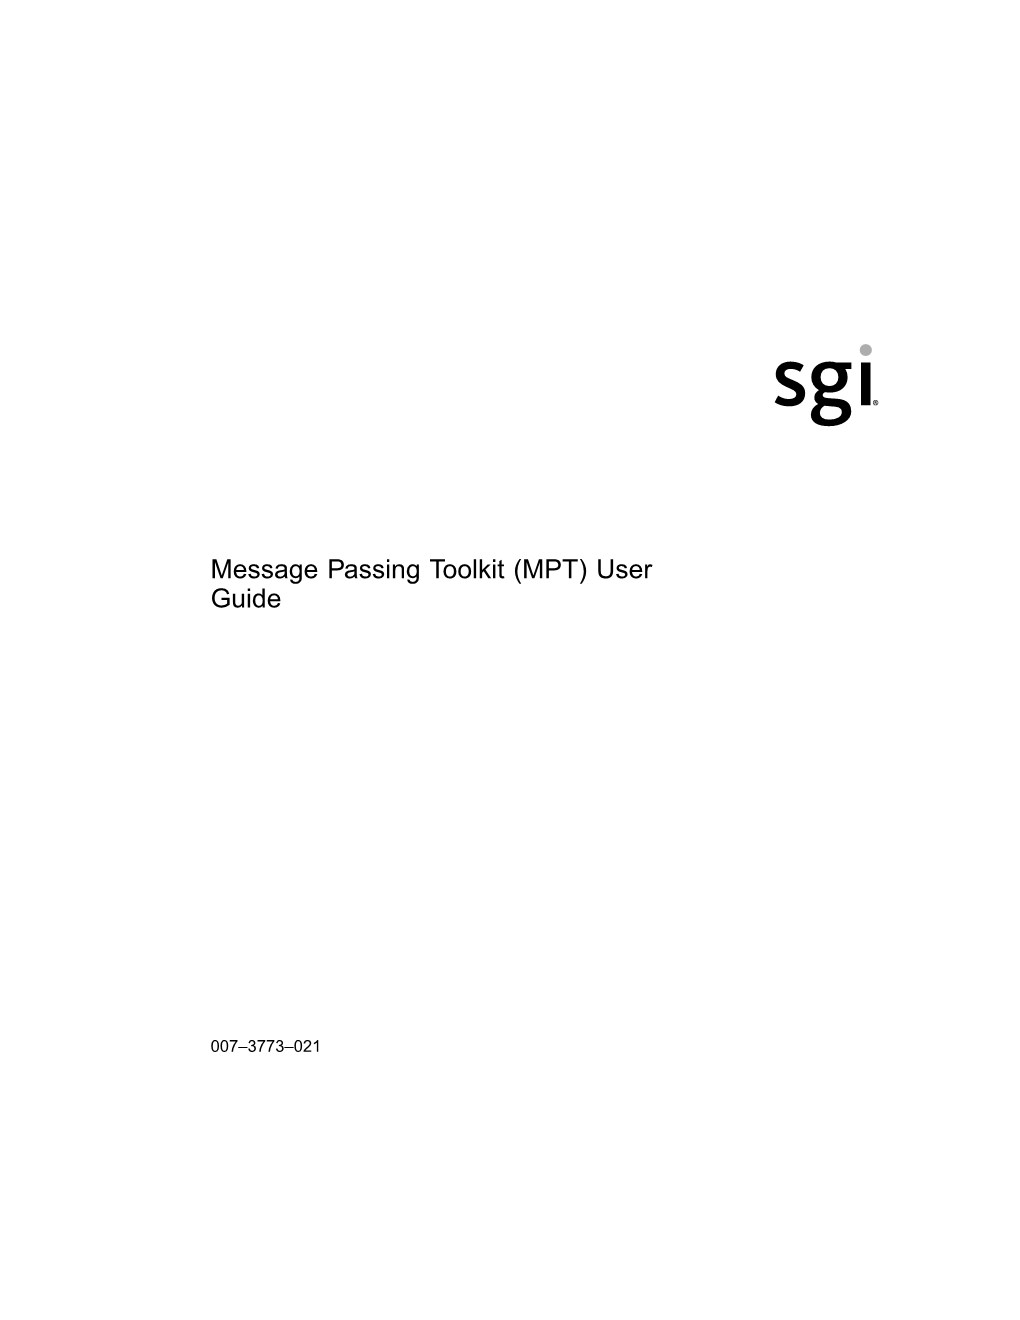 Message Passing Toolkit (MPT) User Guide